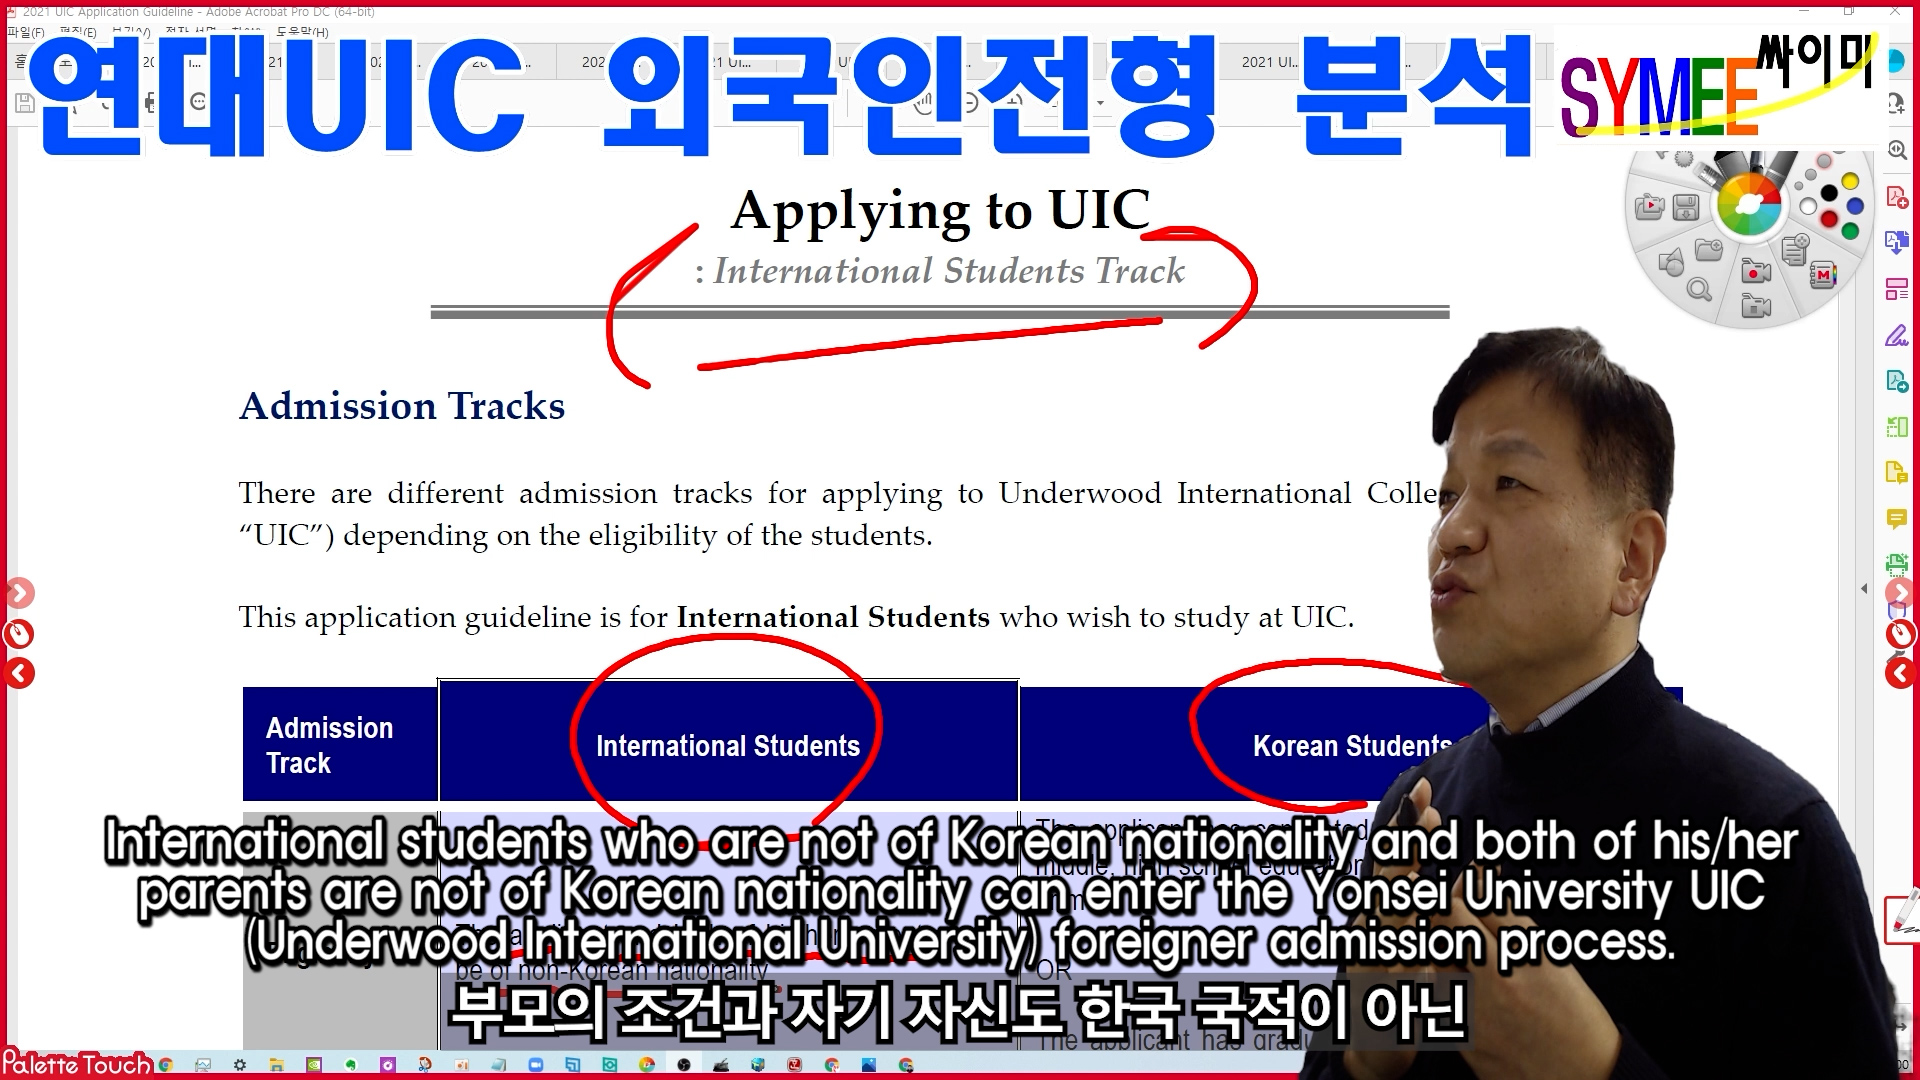 Yonsei Univ. Admission for UIC for Foreign Student 02 Qualifications.00_01_03_12.스틸 003.jpg